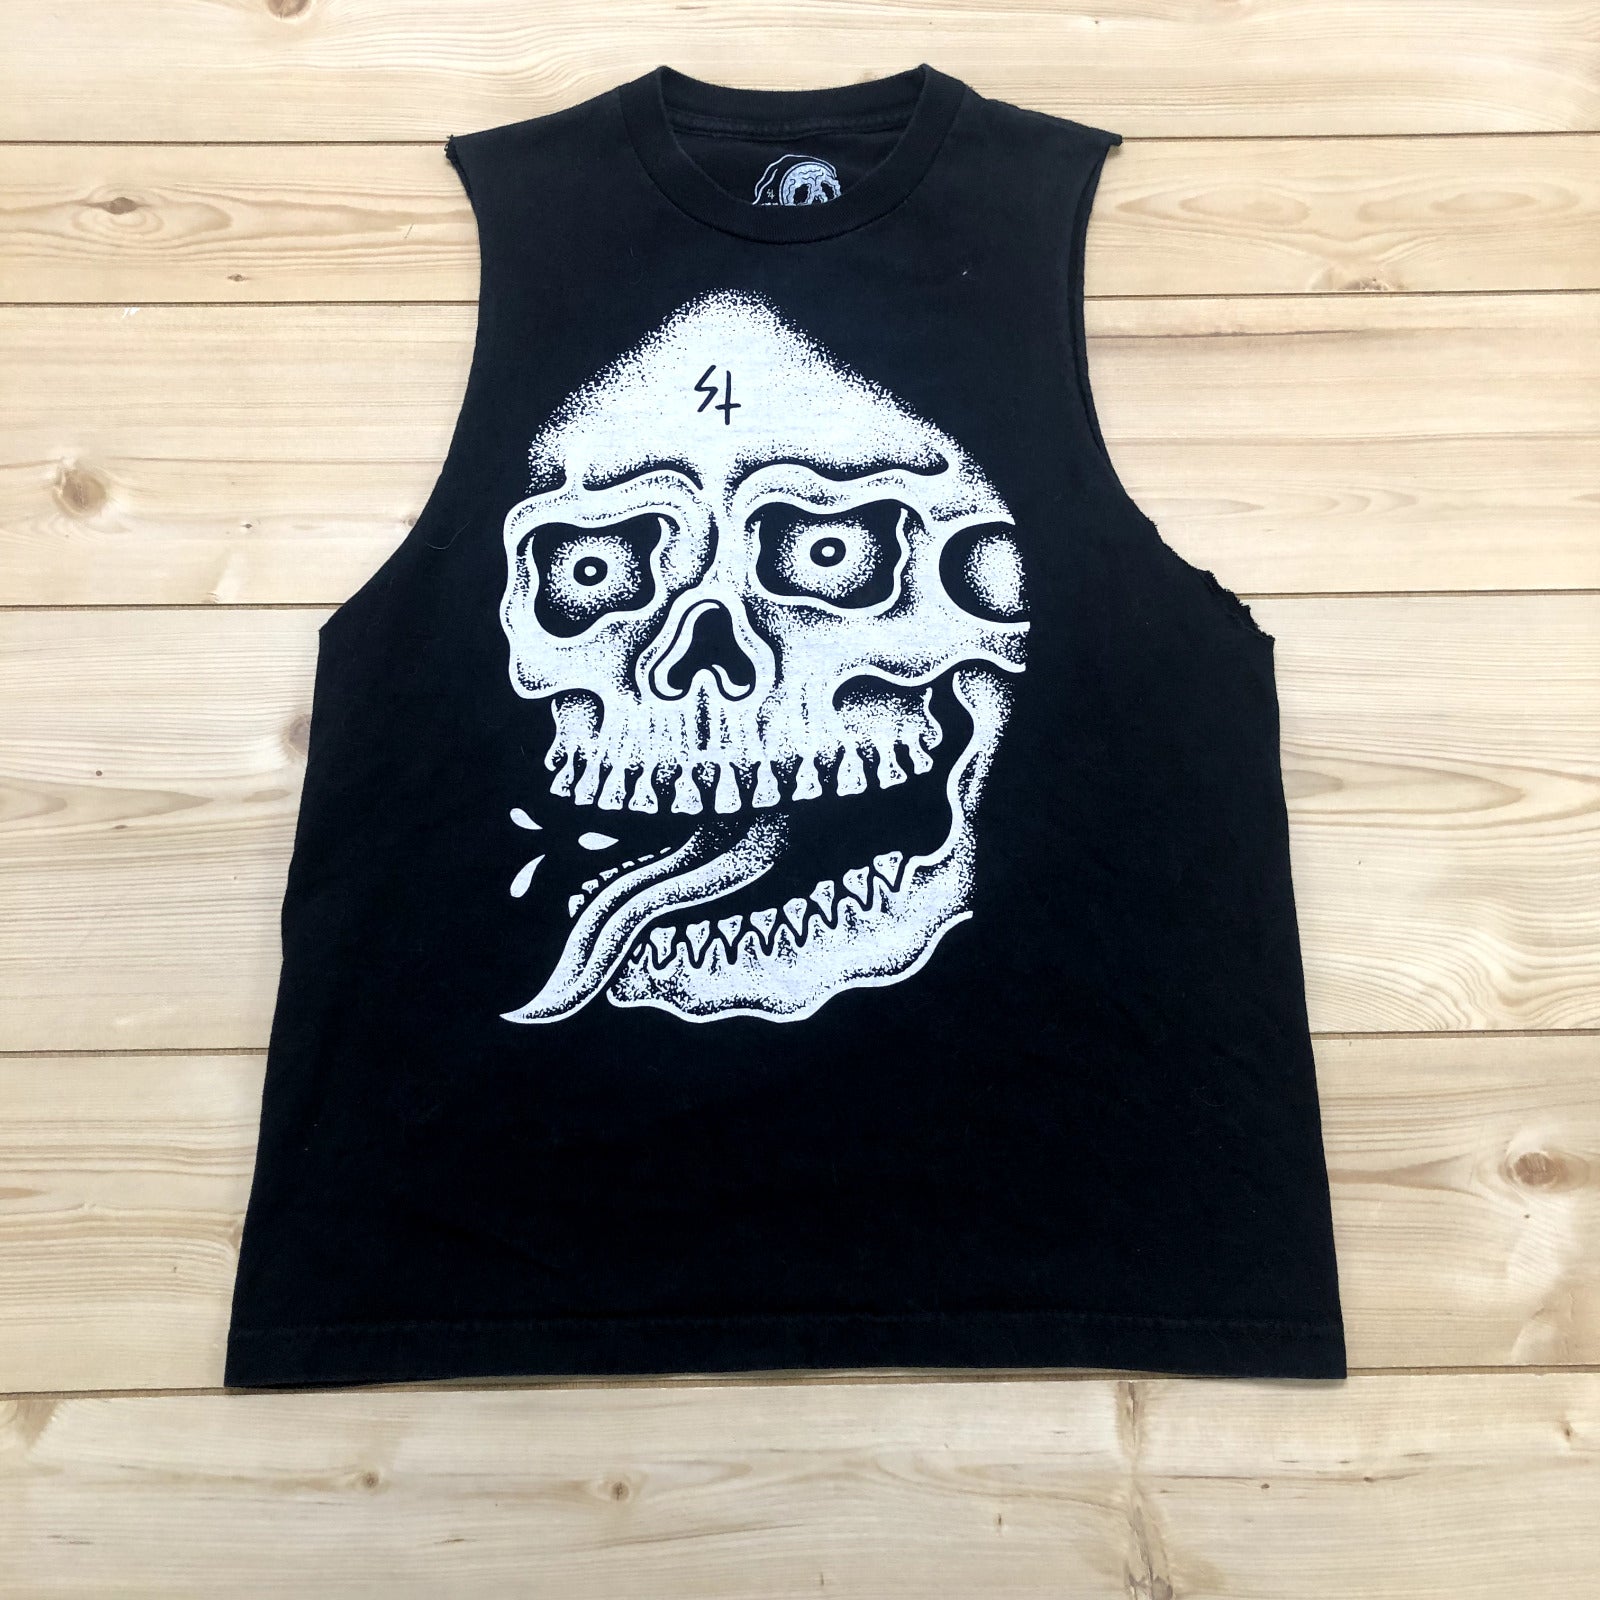 Sketchy Tank Black Skull Tongue Out Sleeveless Pullover T-Shirt Adult Size M